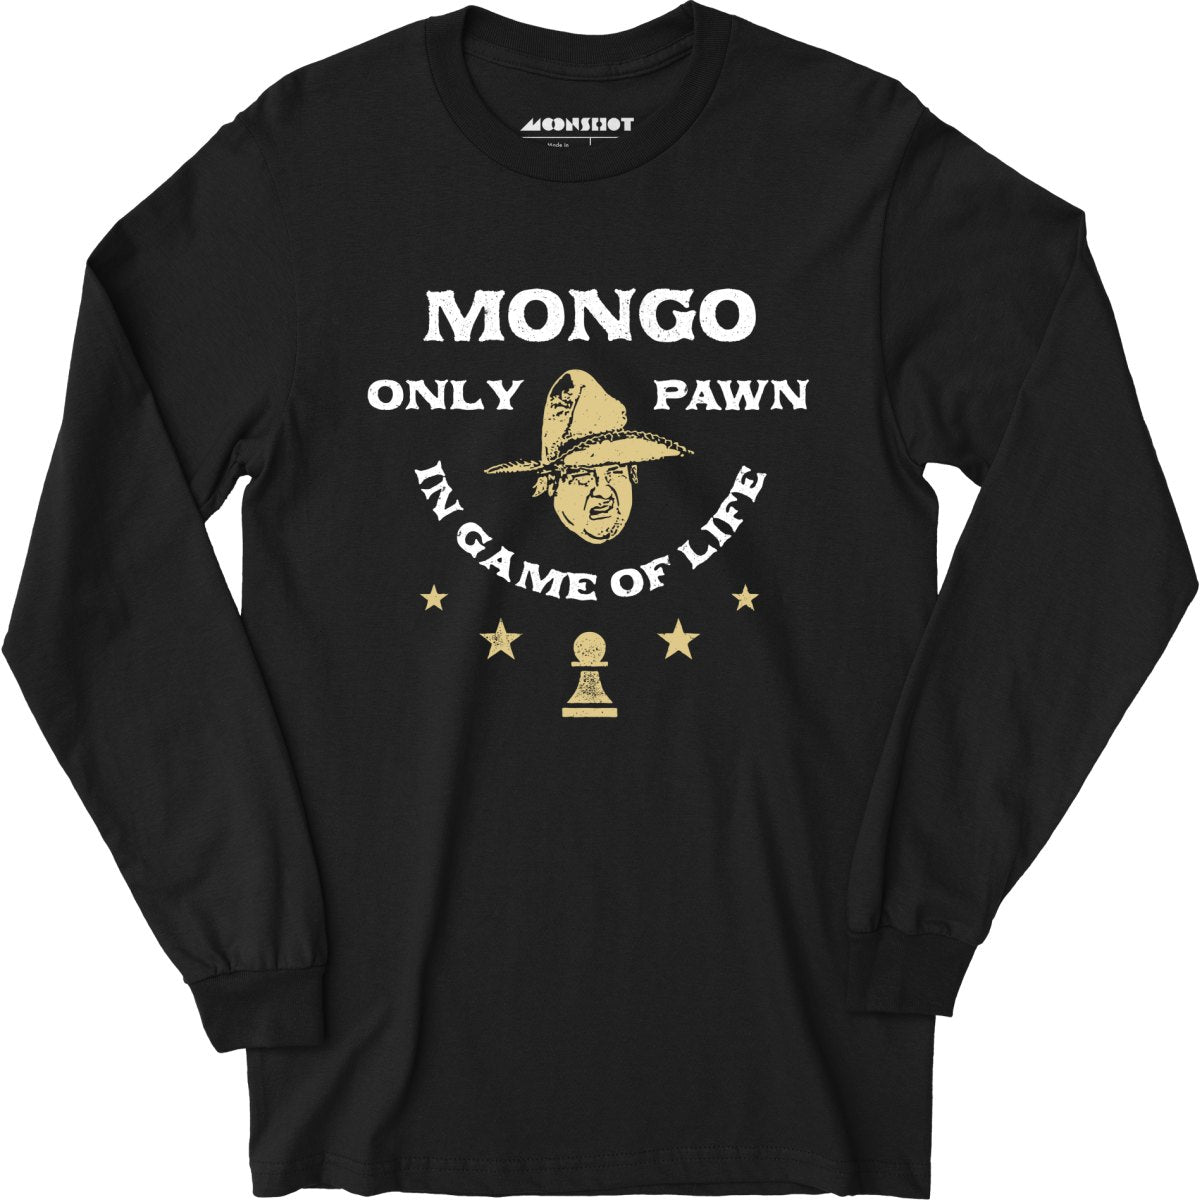 Mongo Only Pawn in Game of Life - Long Sleeve T-Shirt